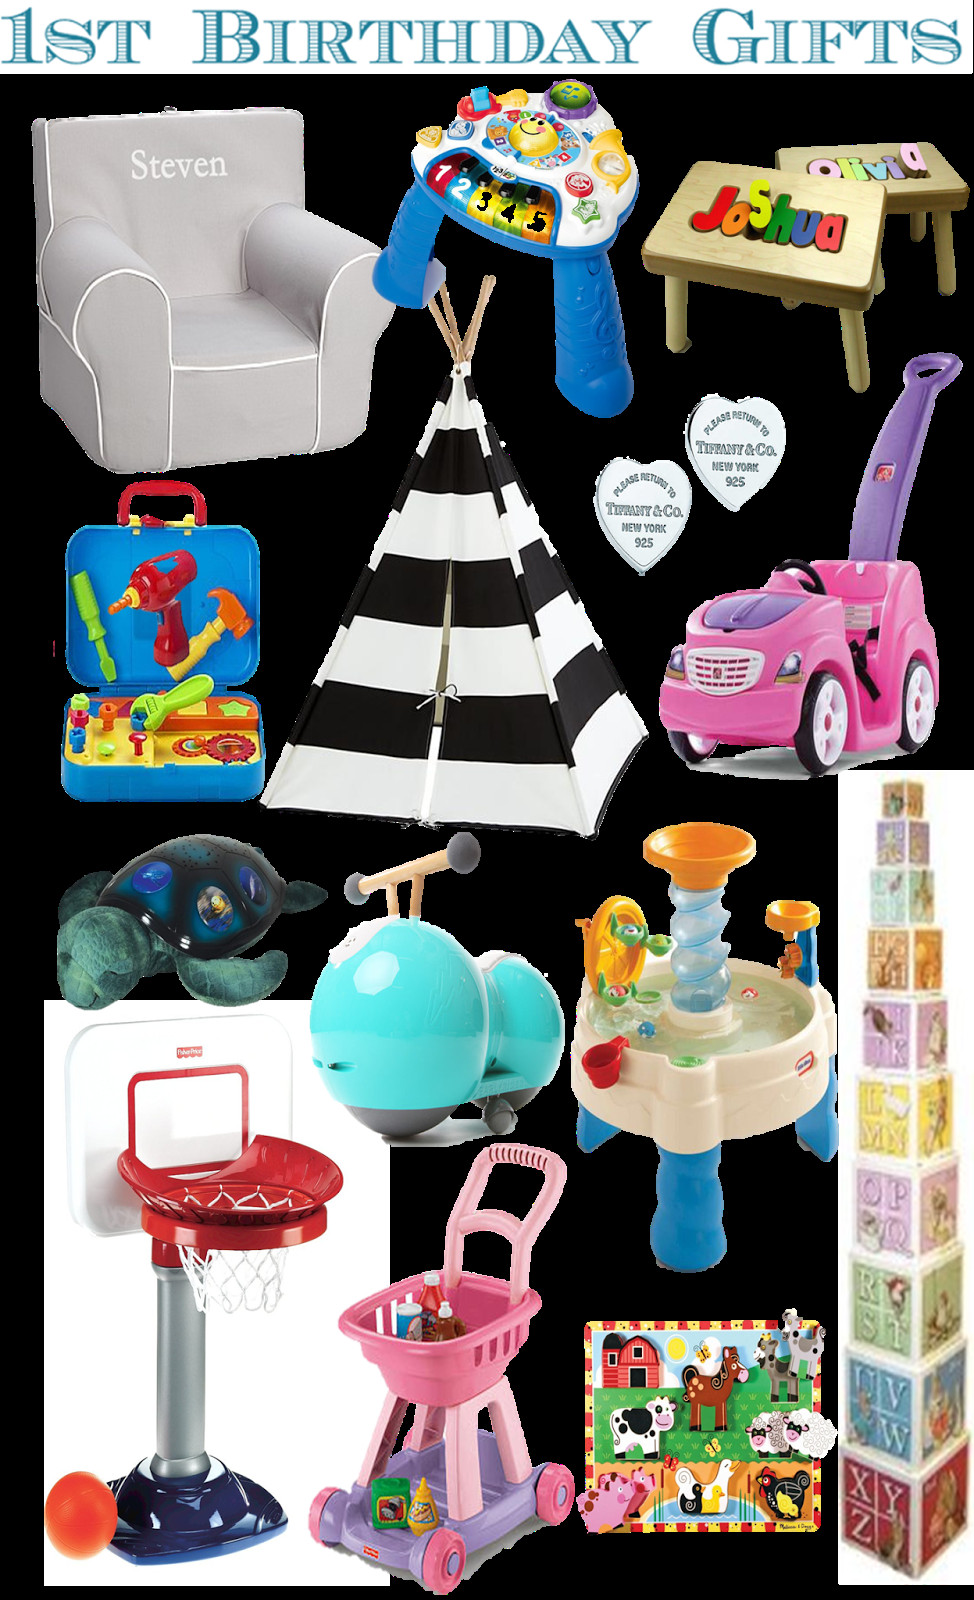 First Birthday Gifts
 rnlMusings Gift Guide 1st Birthday Gifts